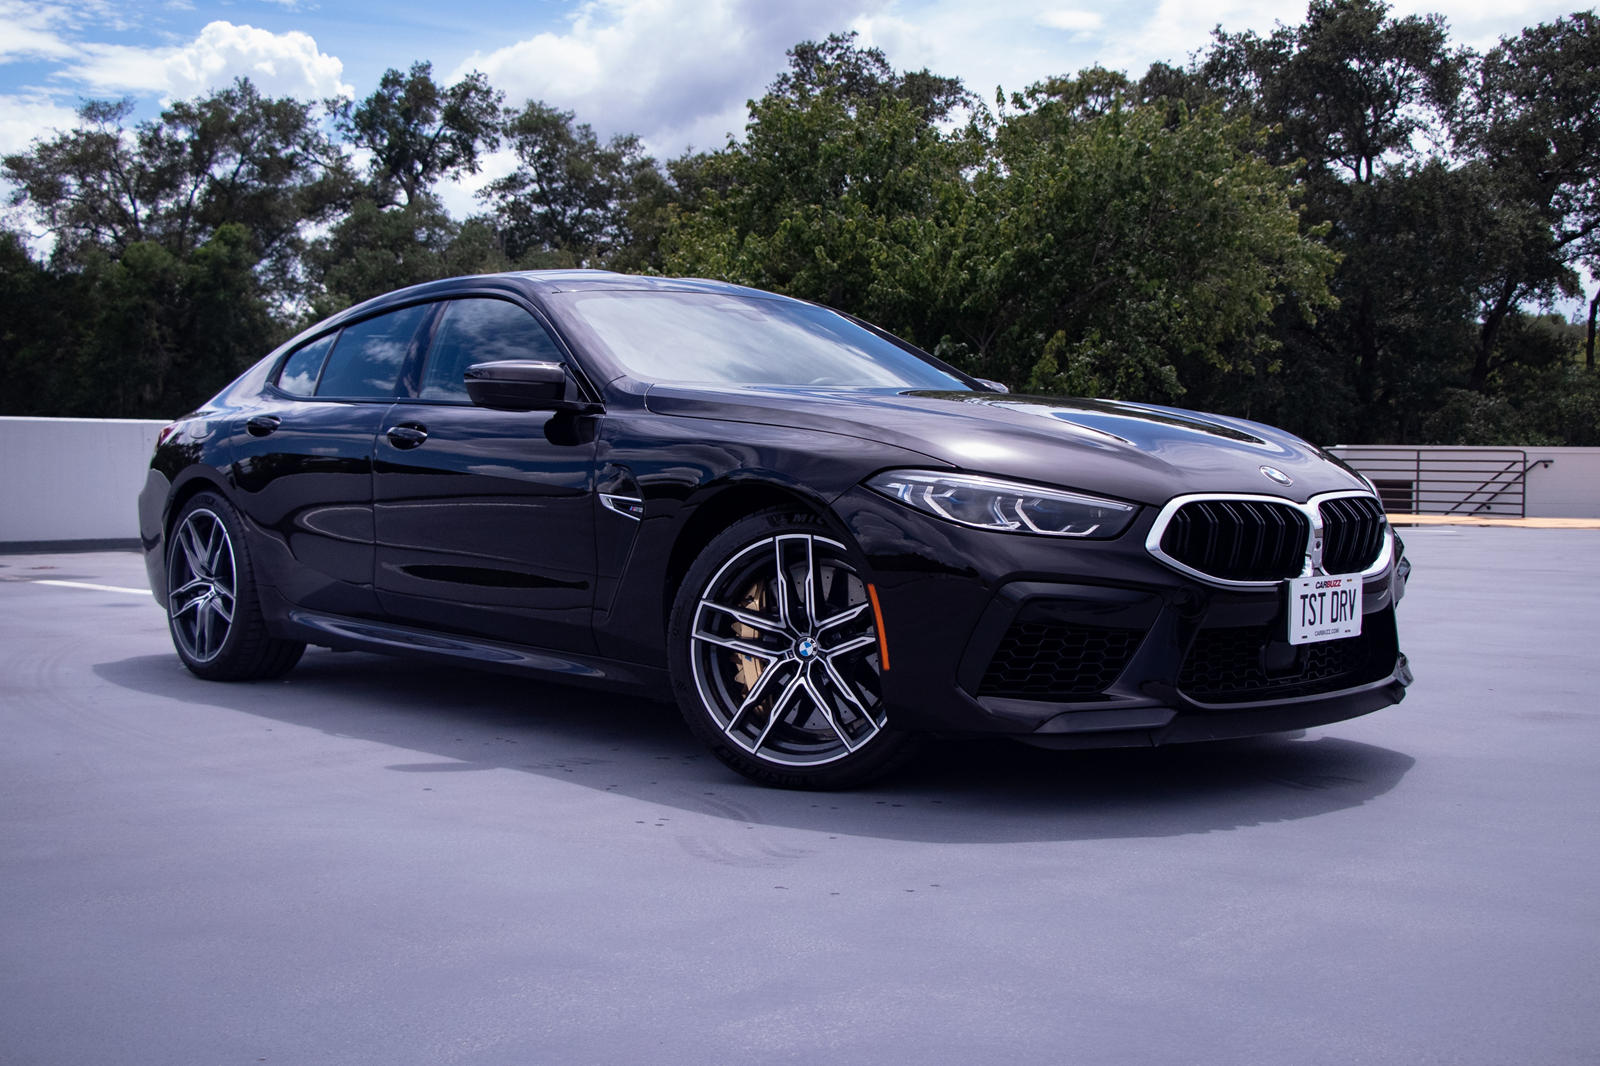 Used BMW M8 Gran Coupe. Check M8 Gran Coupe for sale in